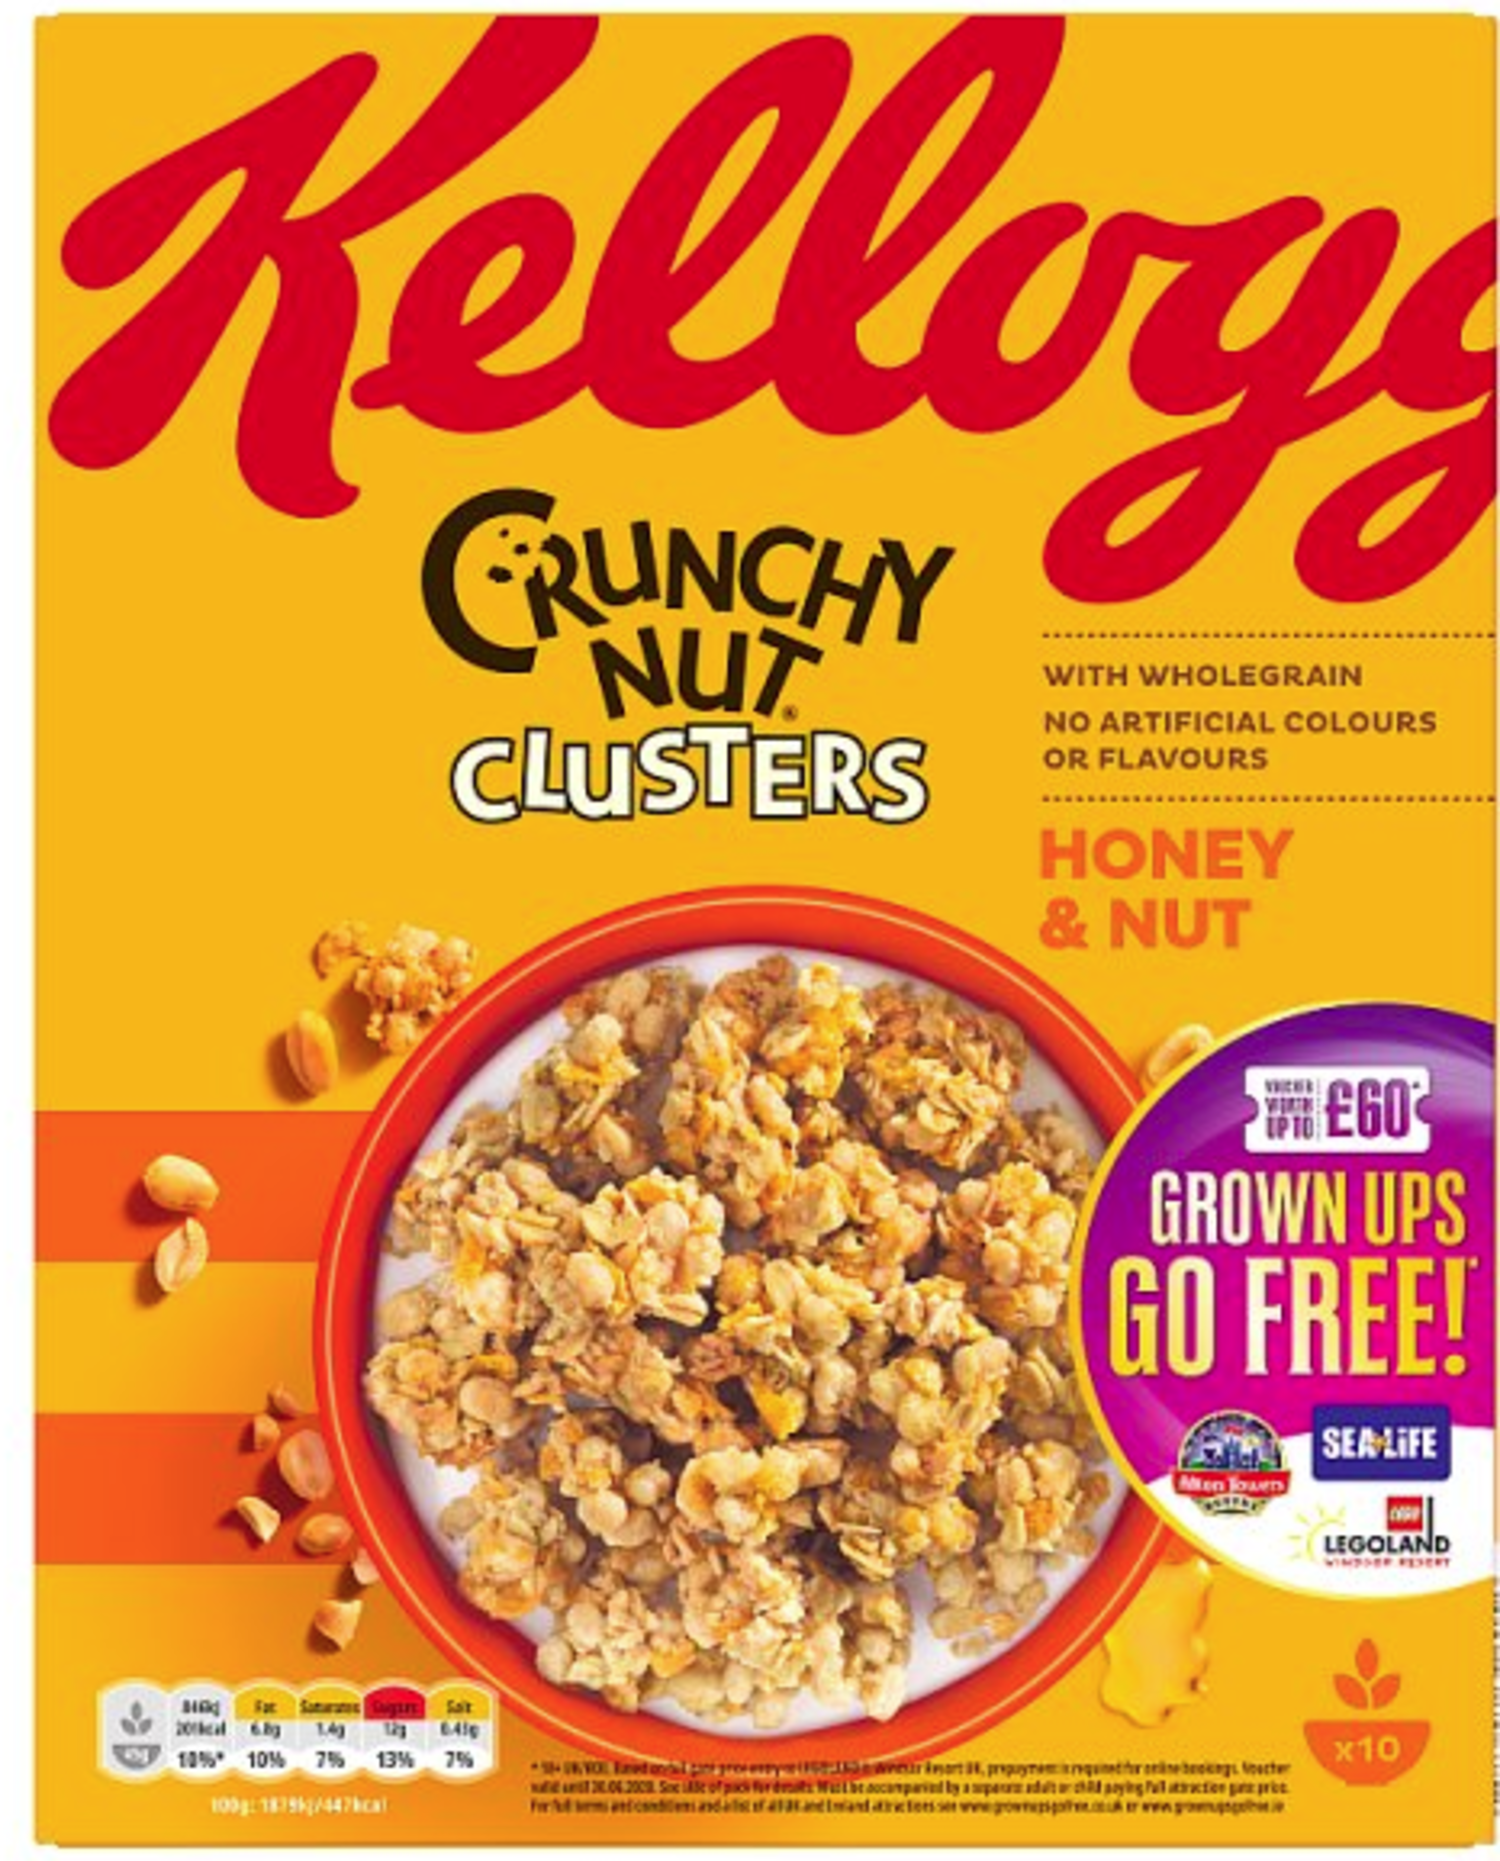 Kellogg's launches Crunchy Nut Peanut Butter Clusters